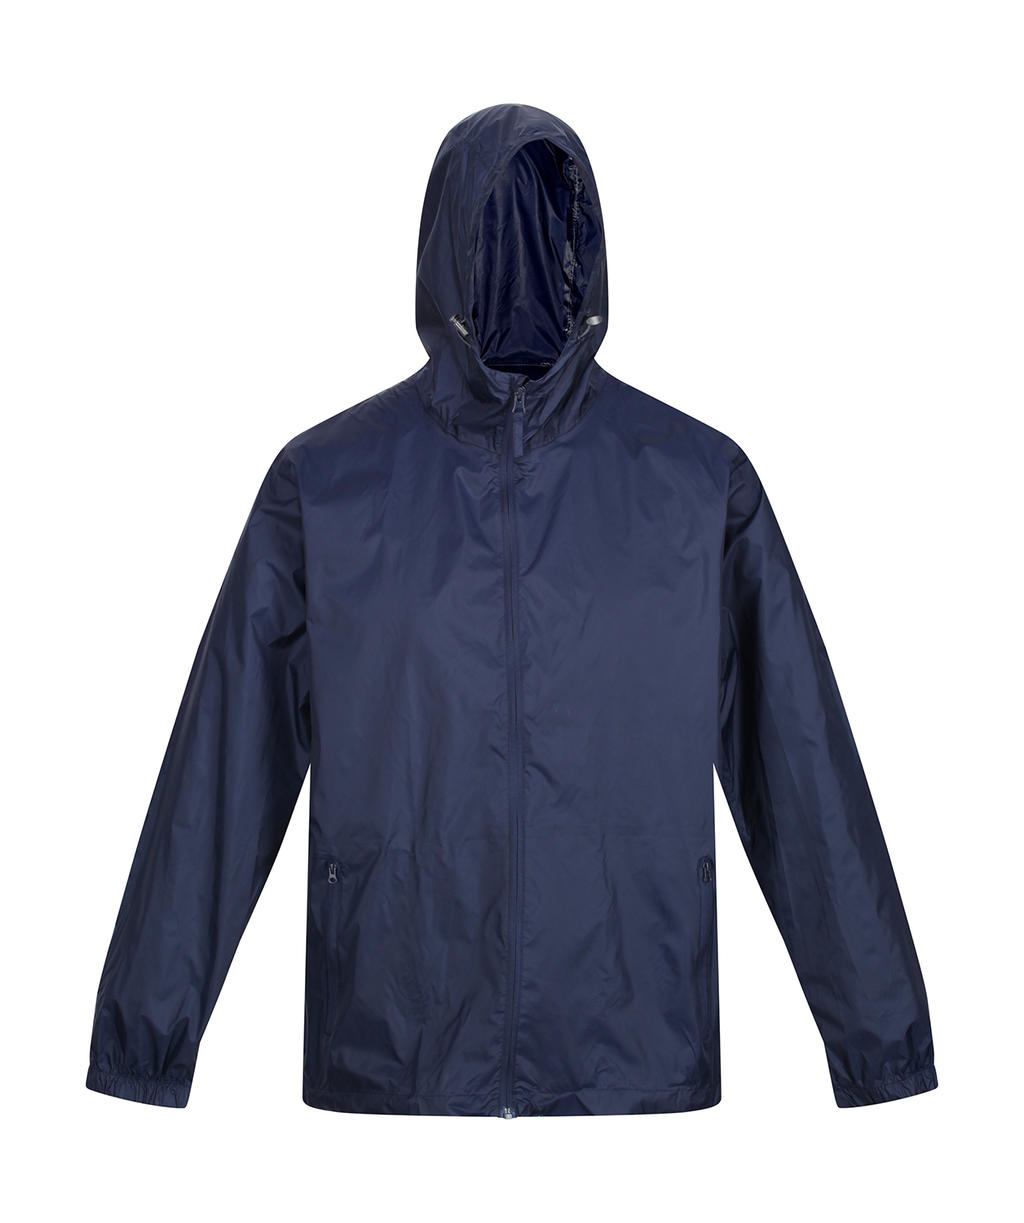  Pro Pack Away Jacket in Farbe Navy